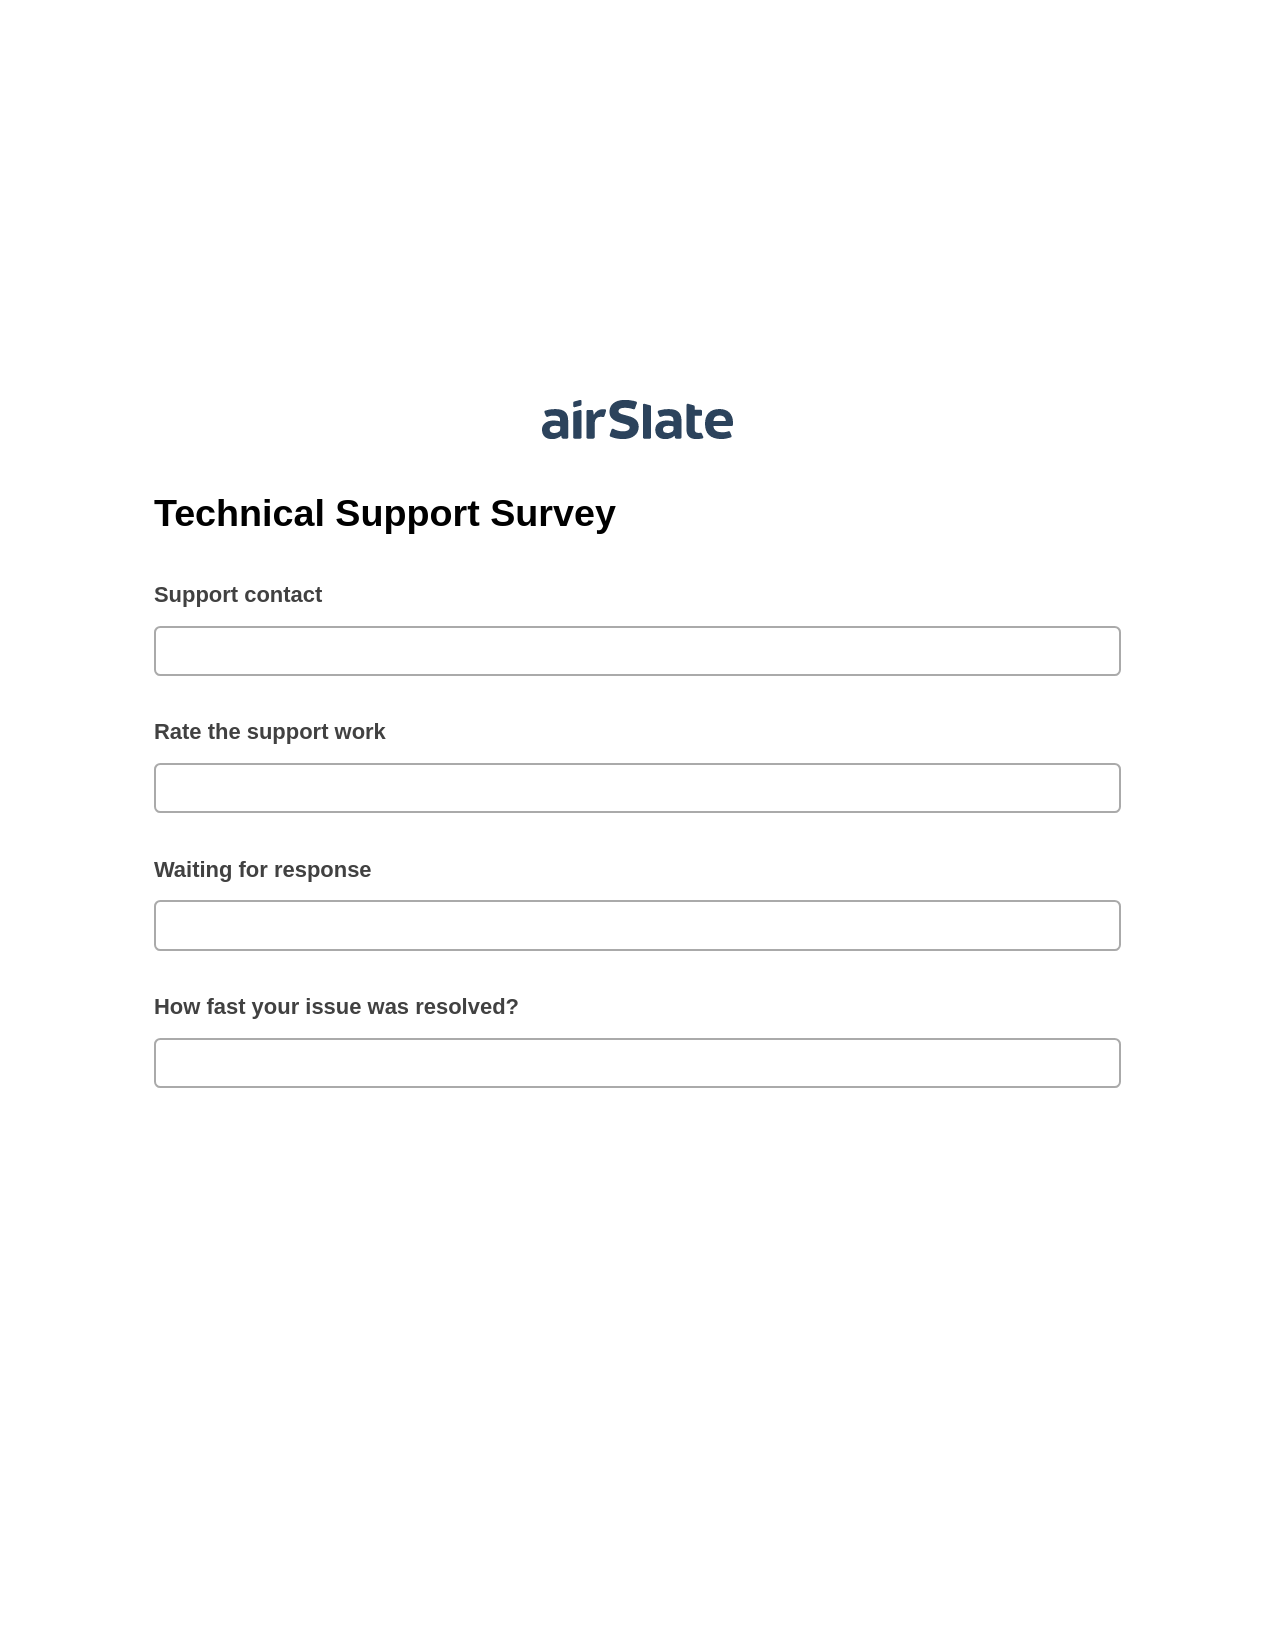 Technical Support Survey Prefill from NetSuite records, Create Slate Reminder Bot, Export to WebMerge Bot